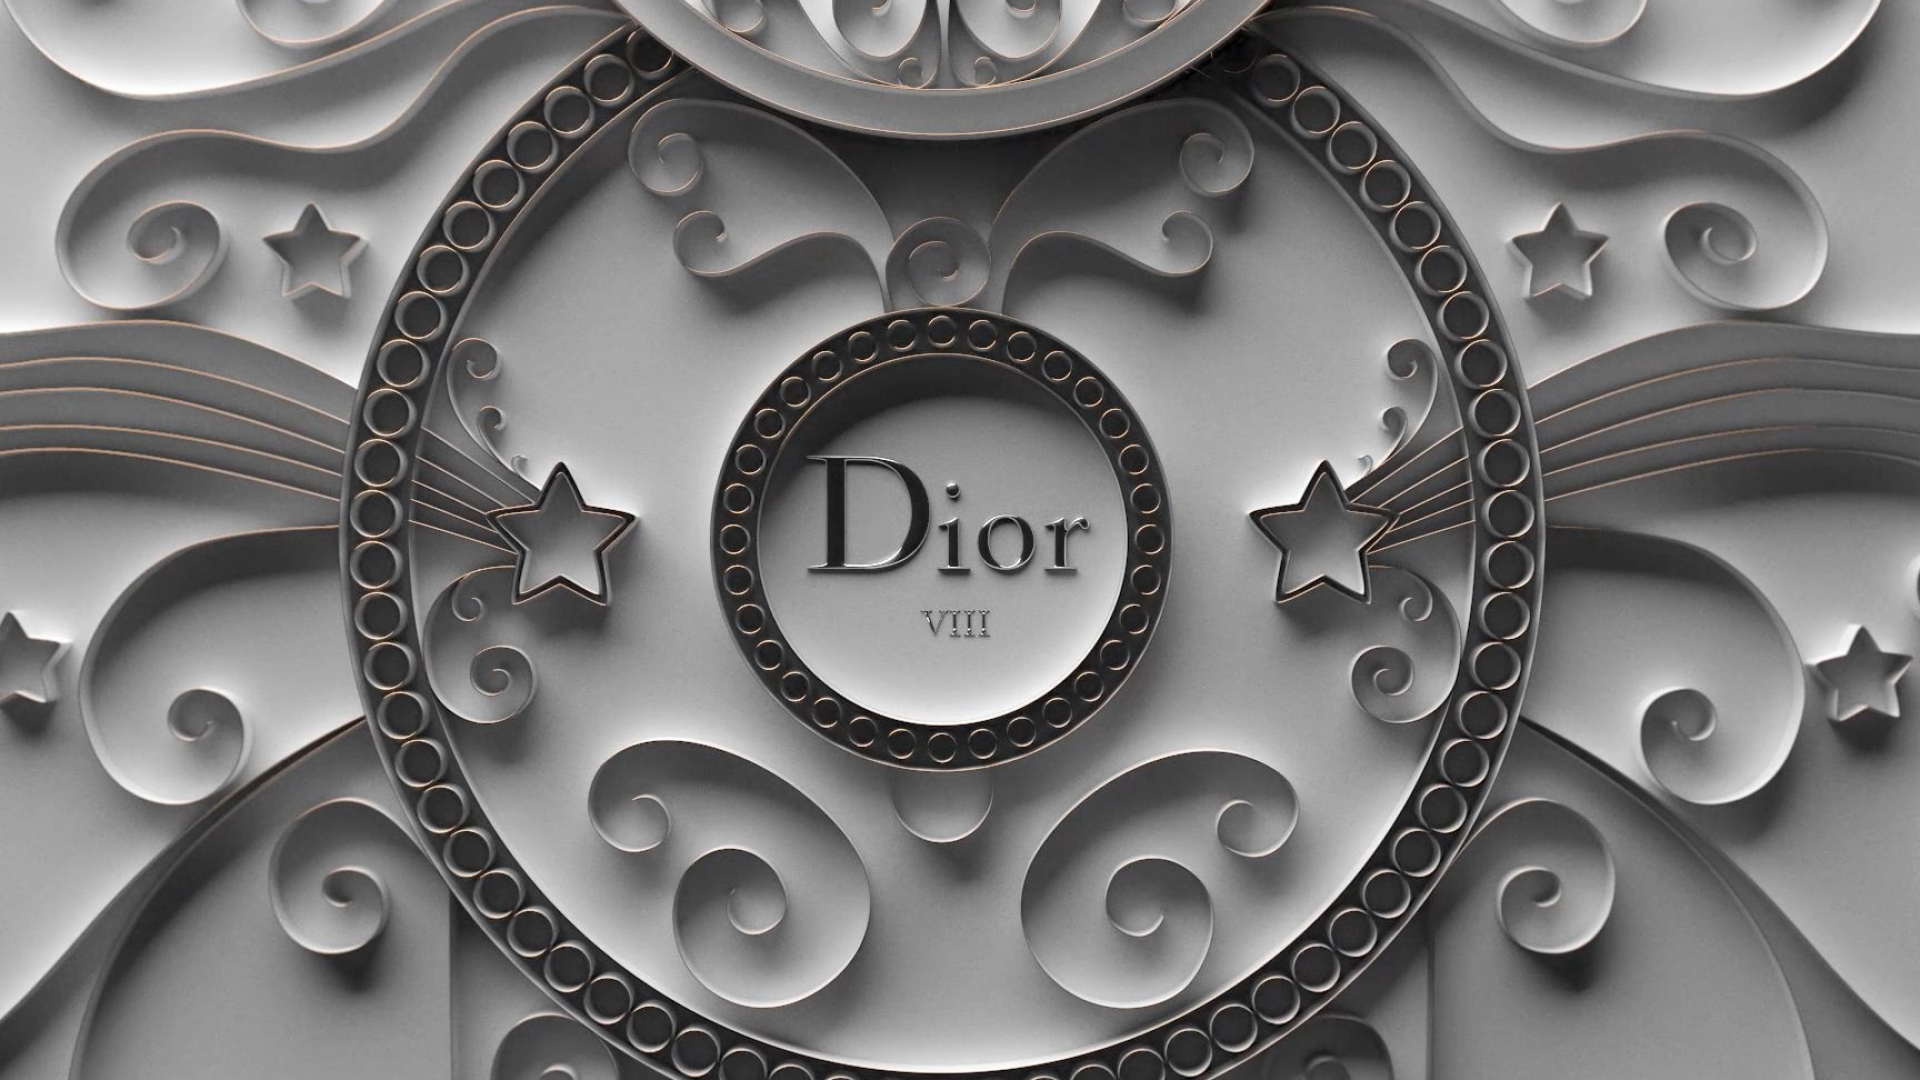 Dior: The brand founded on ideals of feminine beauty, Monochrome. 1920x1080 Full HD Wallpaper.